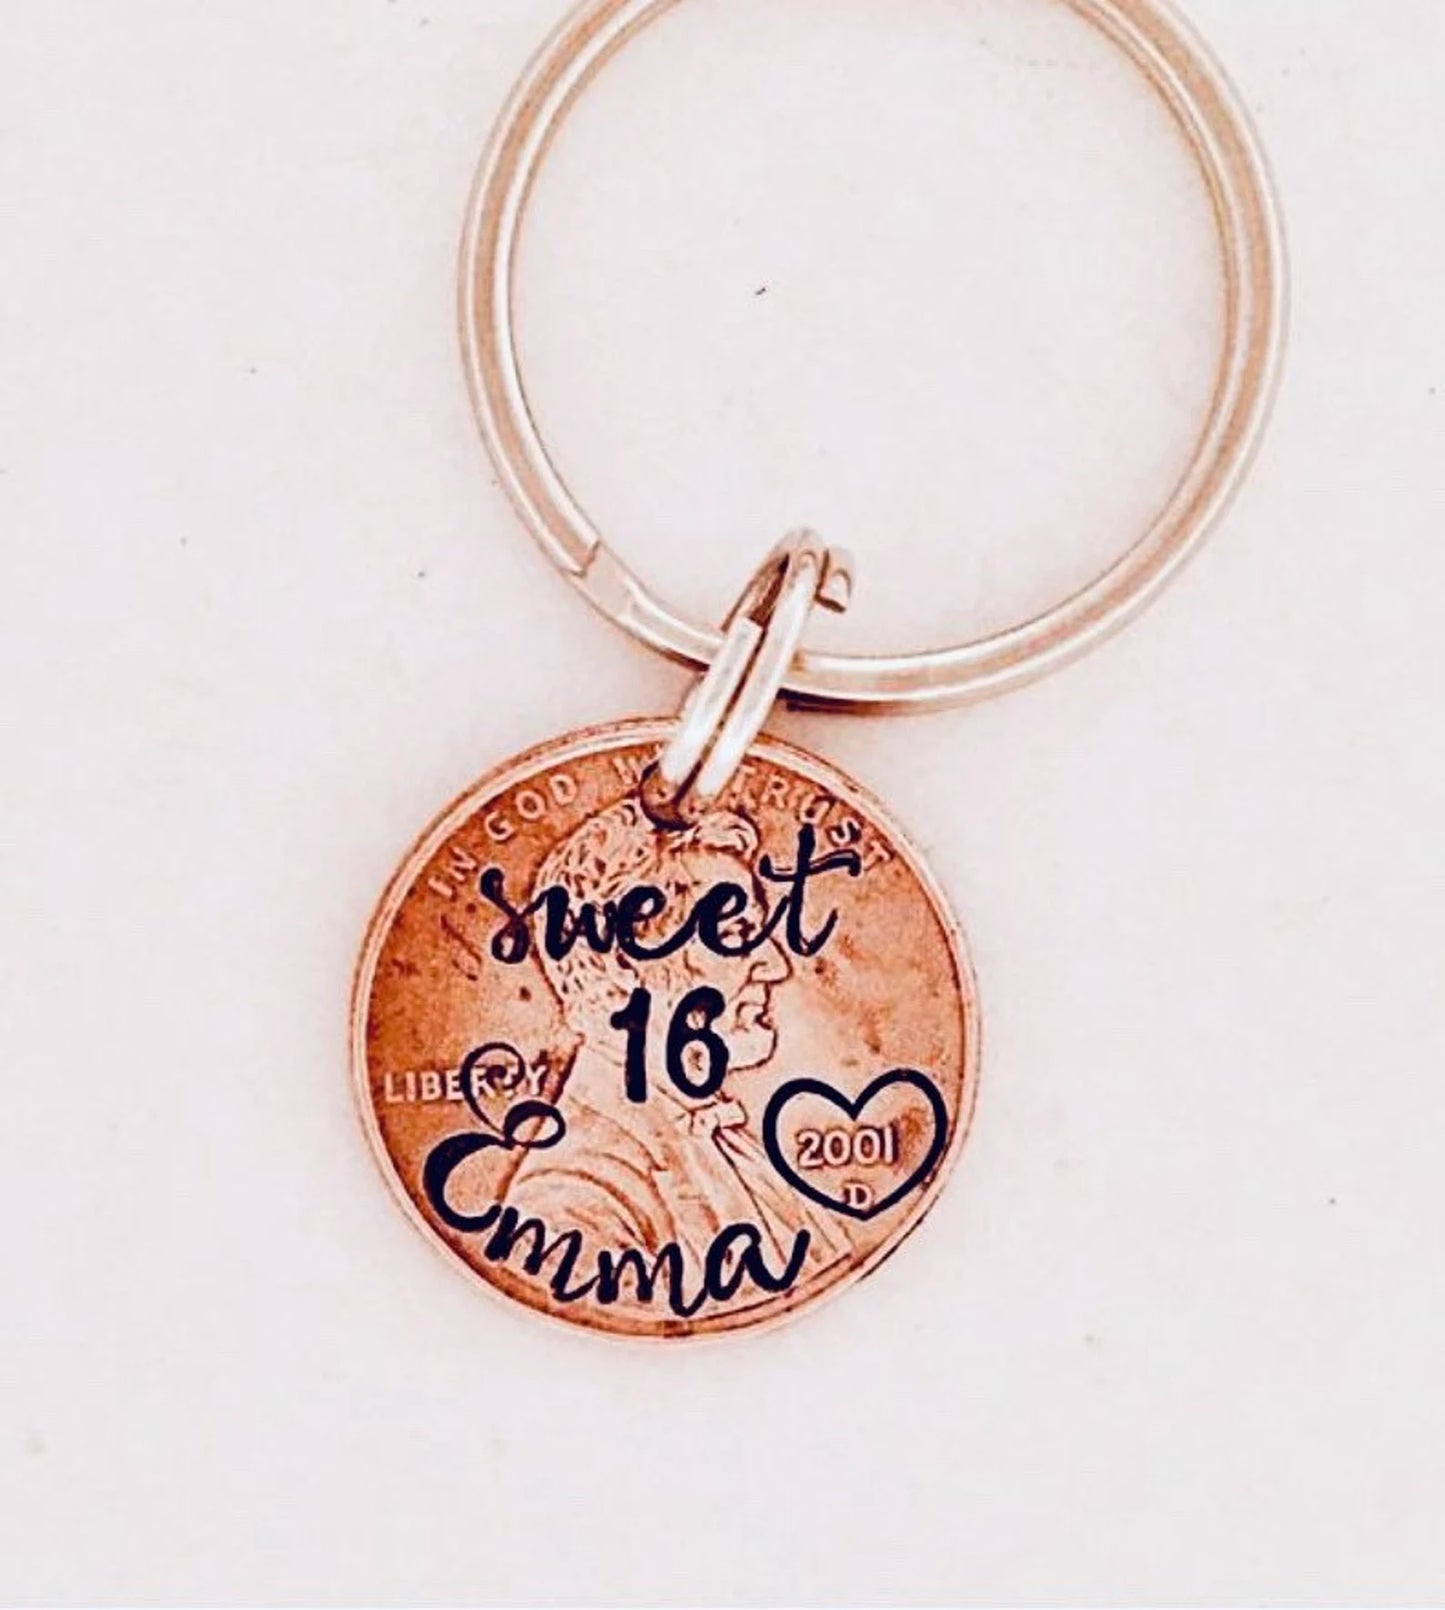 Sweet 16 key ring • Penny • personalized penny • Penny key ring • new driver • 16th birthday • license • Birthday gift